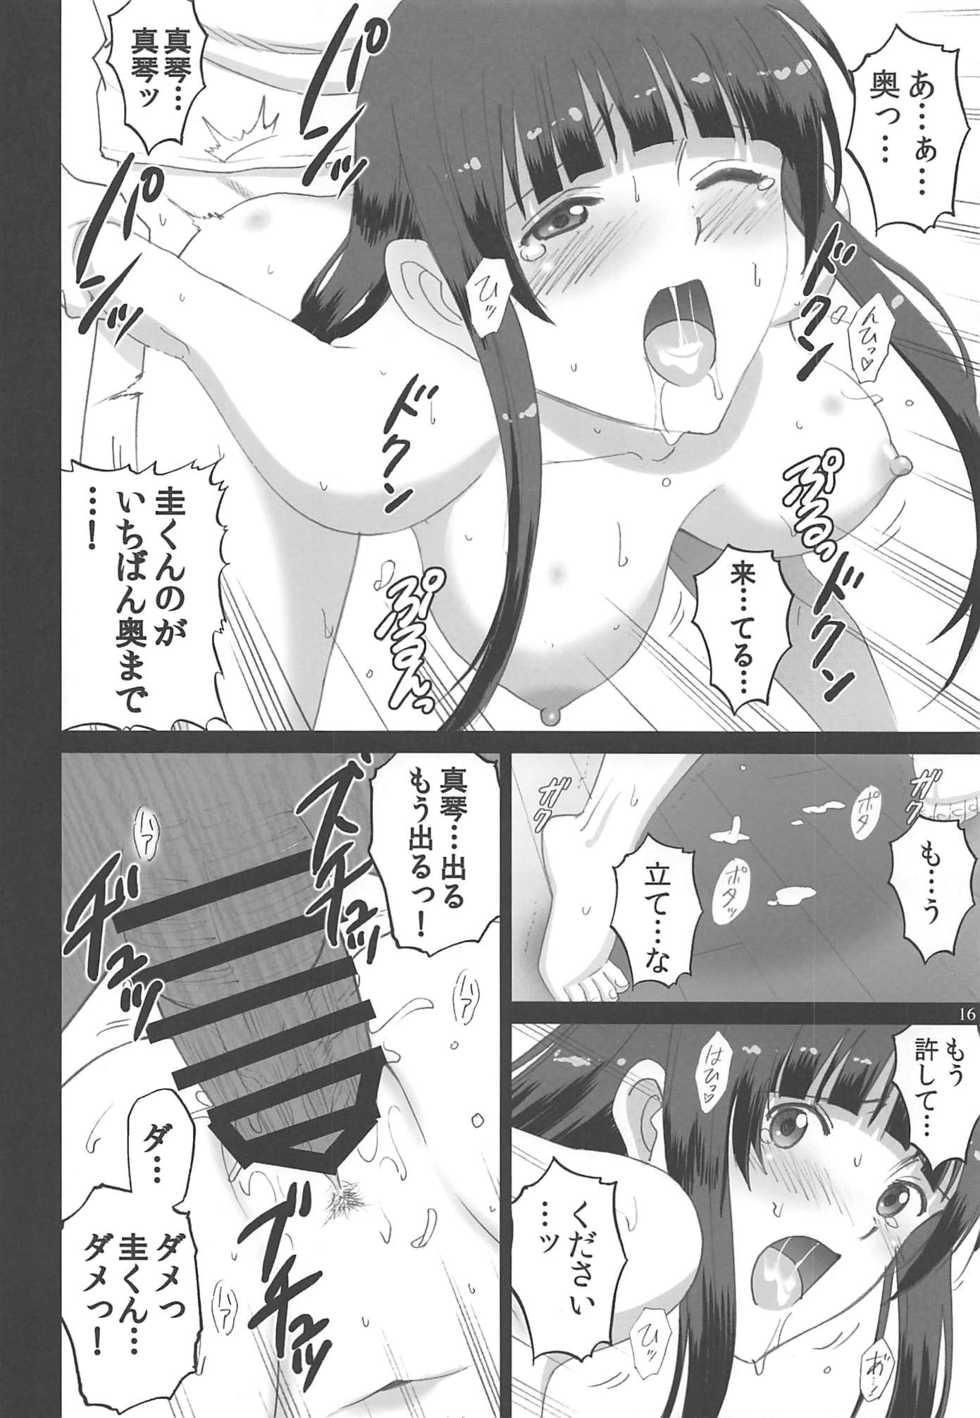 [ACTIVA (SMAC)] Fellaing Witch (Flying Witch) [2016-08-28] - Page 15